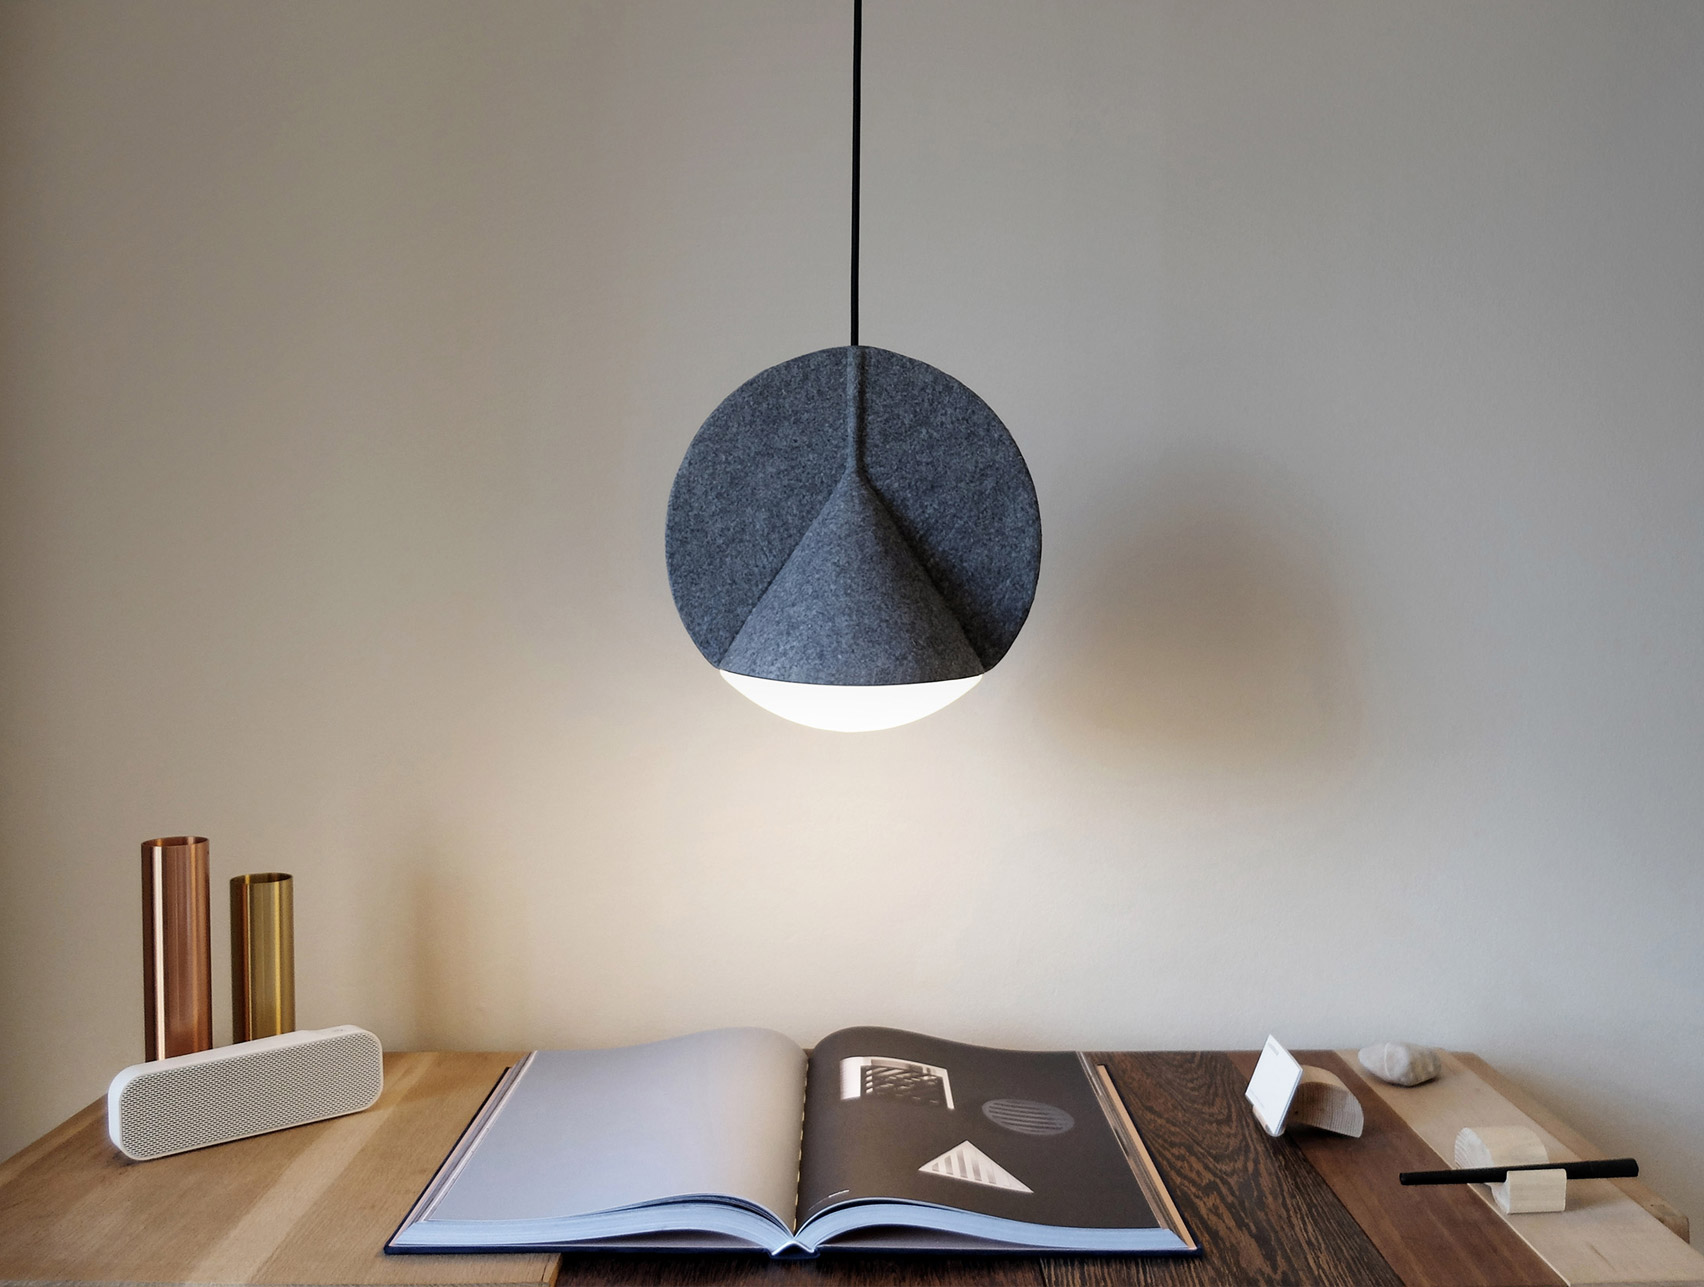 The lamp reminds of a flat disc bisecting a wide, three dimensional cone